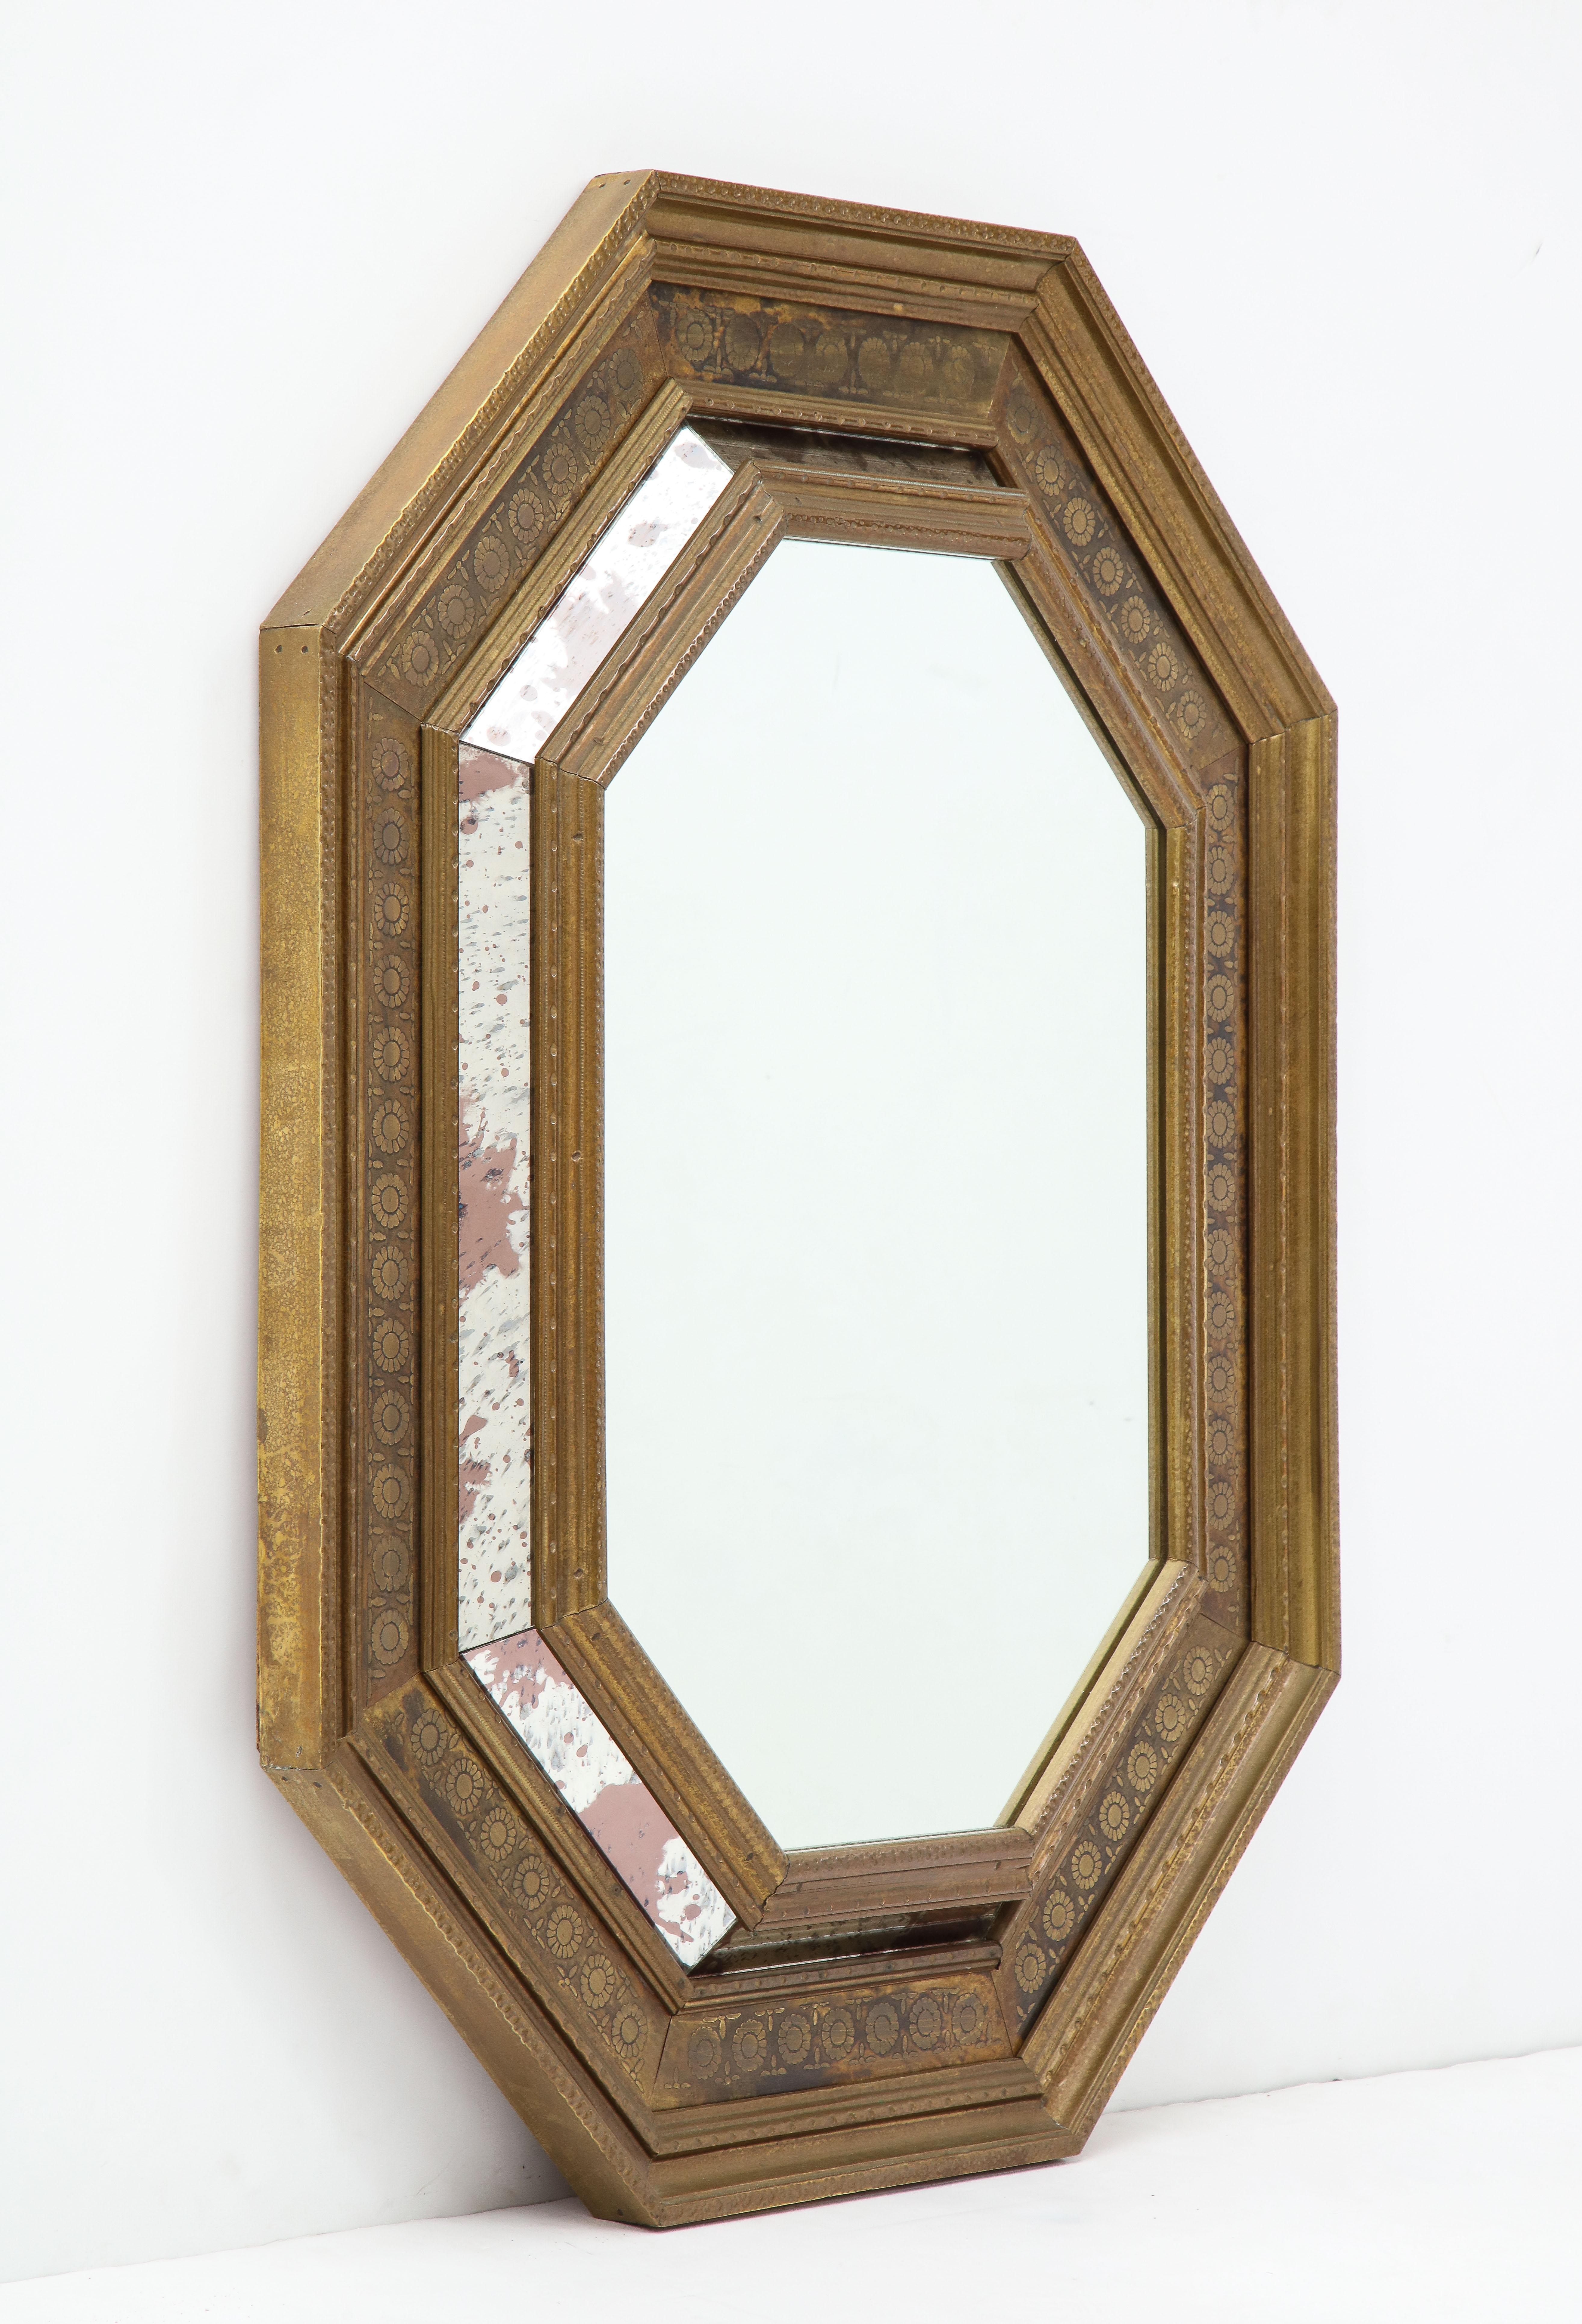 Stunning 1950s octagonal mirror wrapped in tin brass, with antique mirror detail label “Made in Spain”.